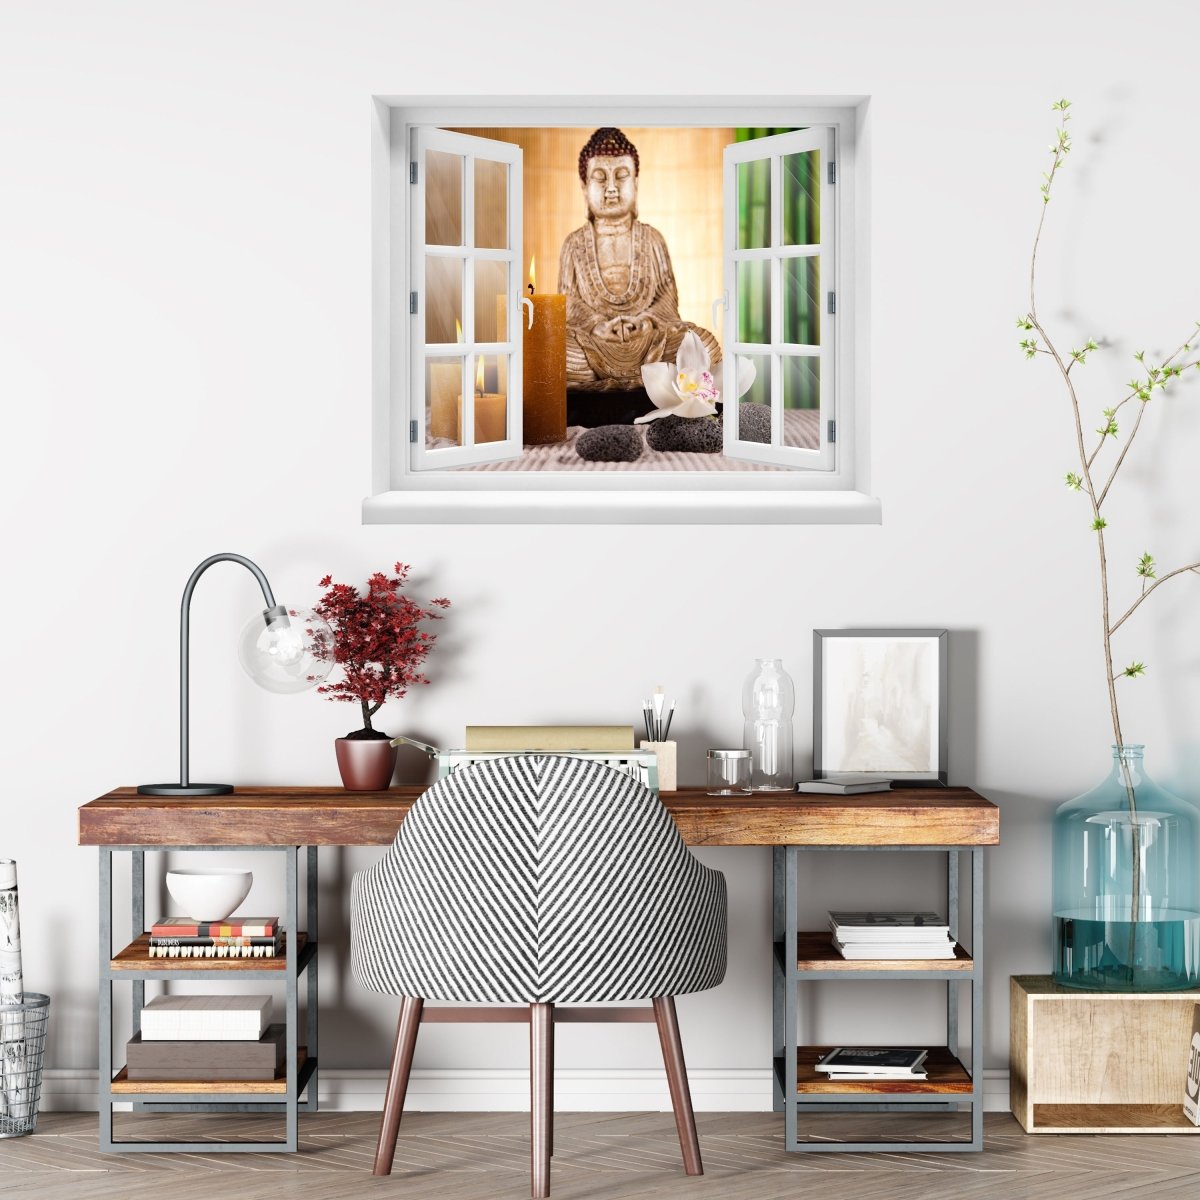 3D Buddha with Candle Wall Sticker - Vivid Colors - Wall Decal M0970